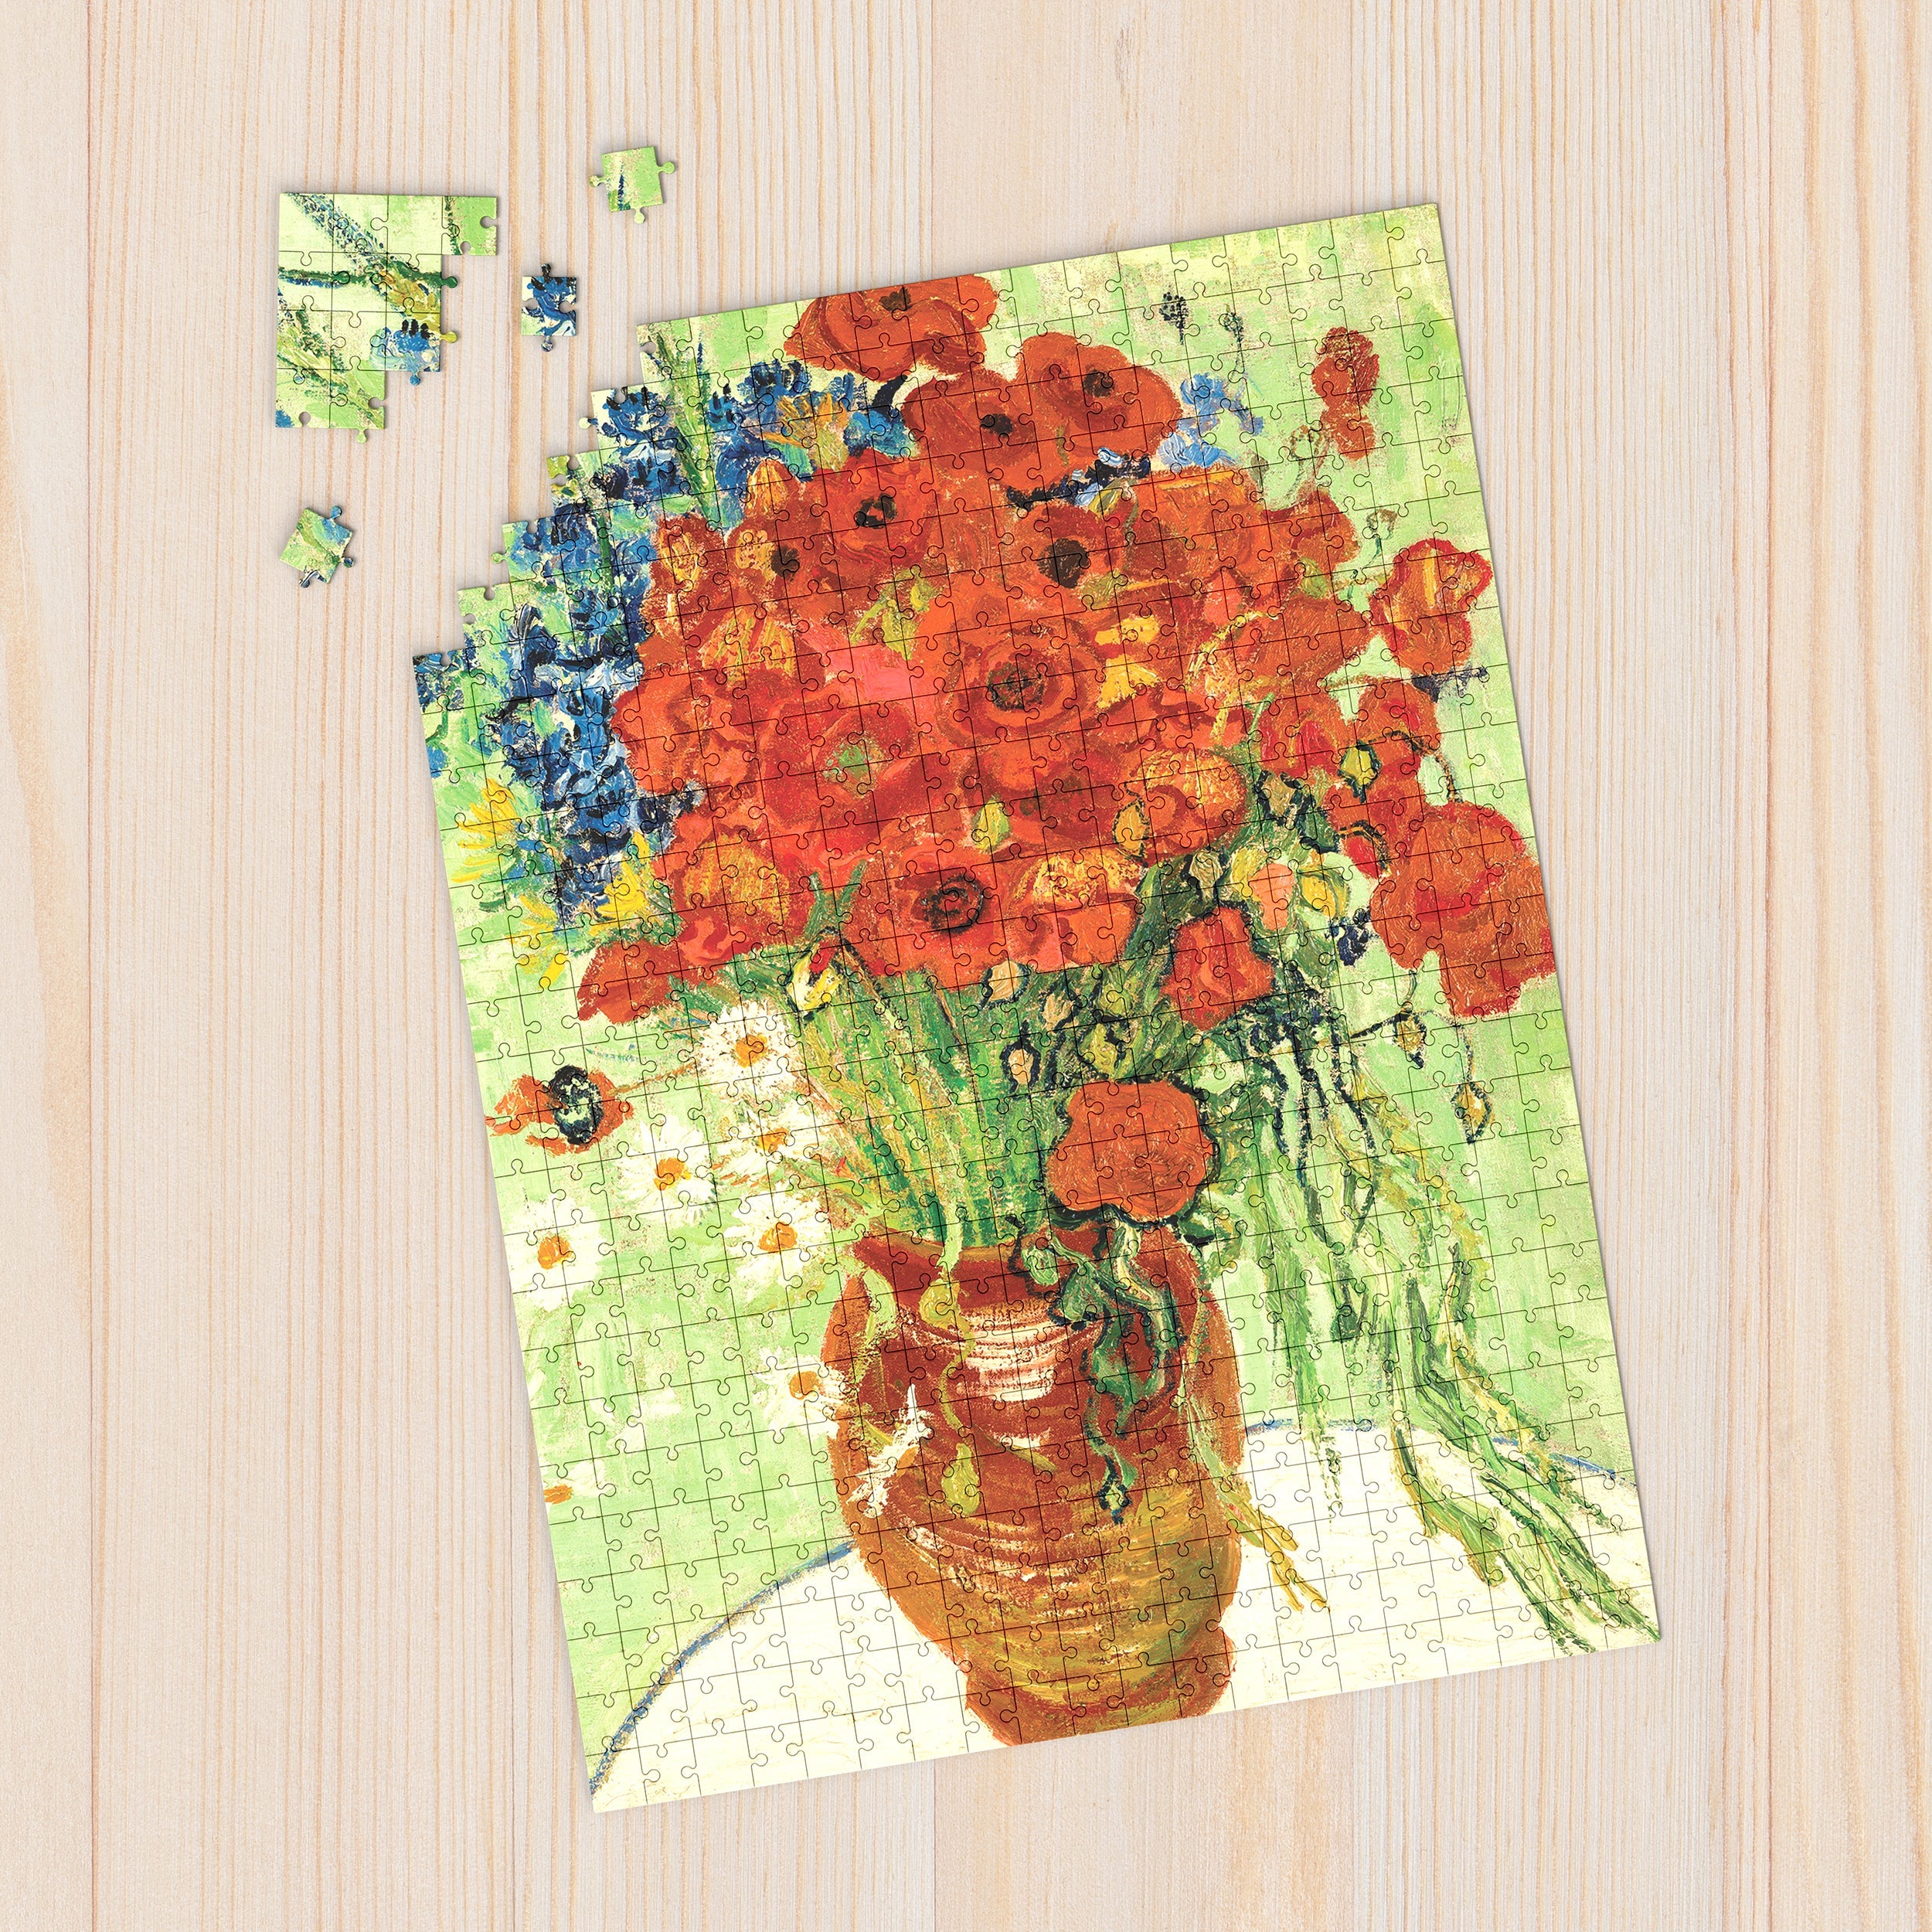 Daisies & Poppies 500 Piece - Jigsaw Puzzle